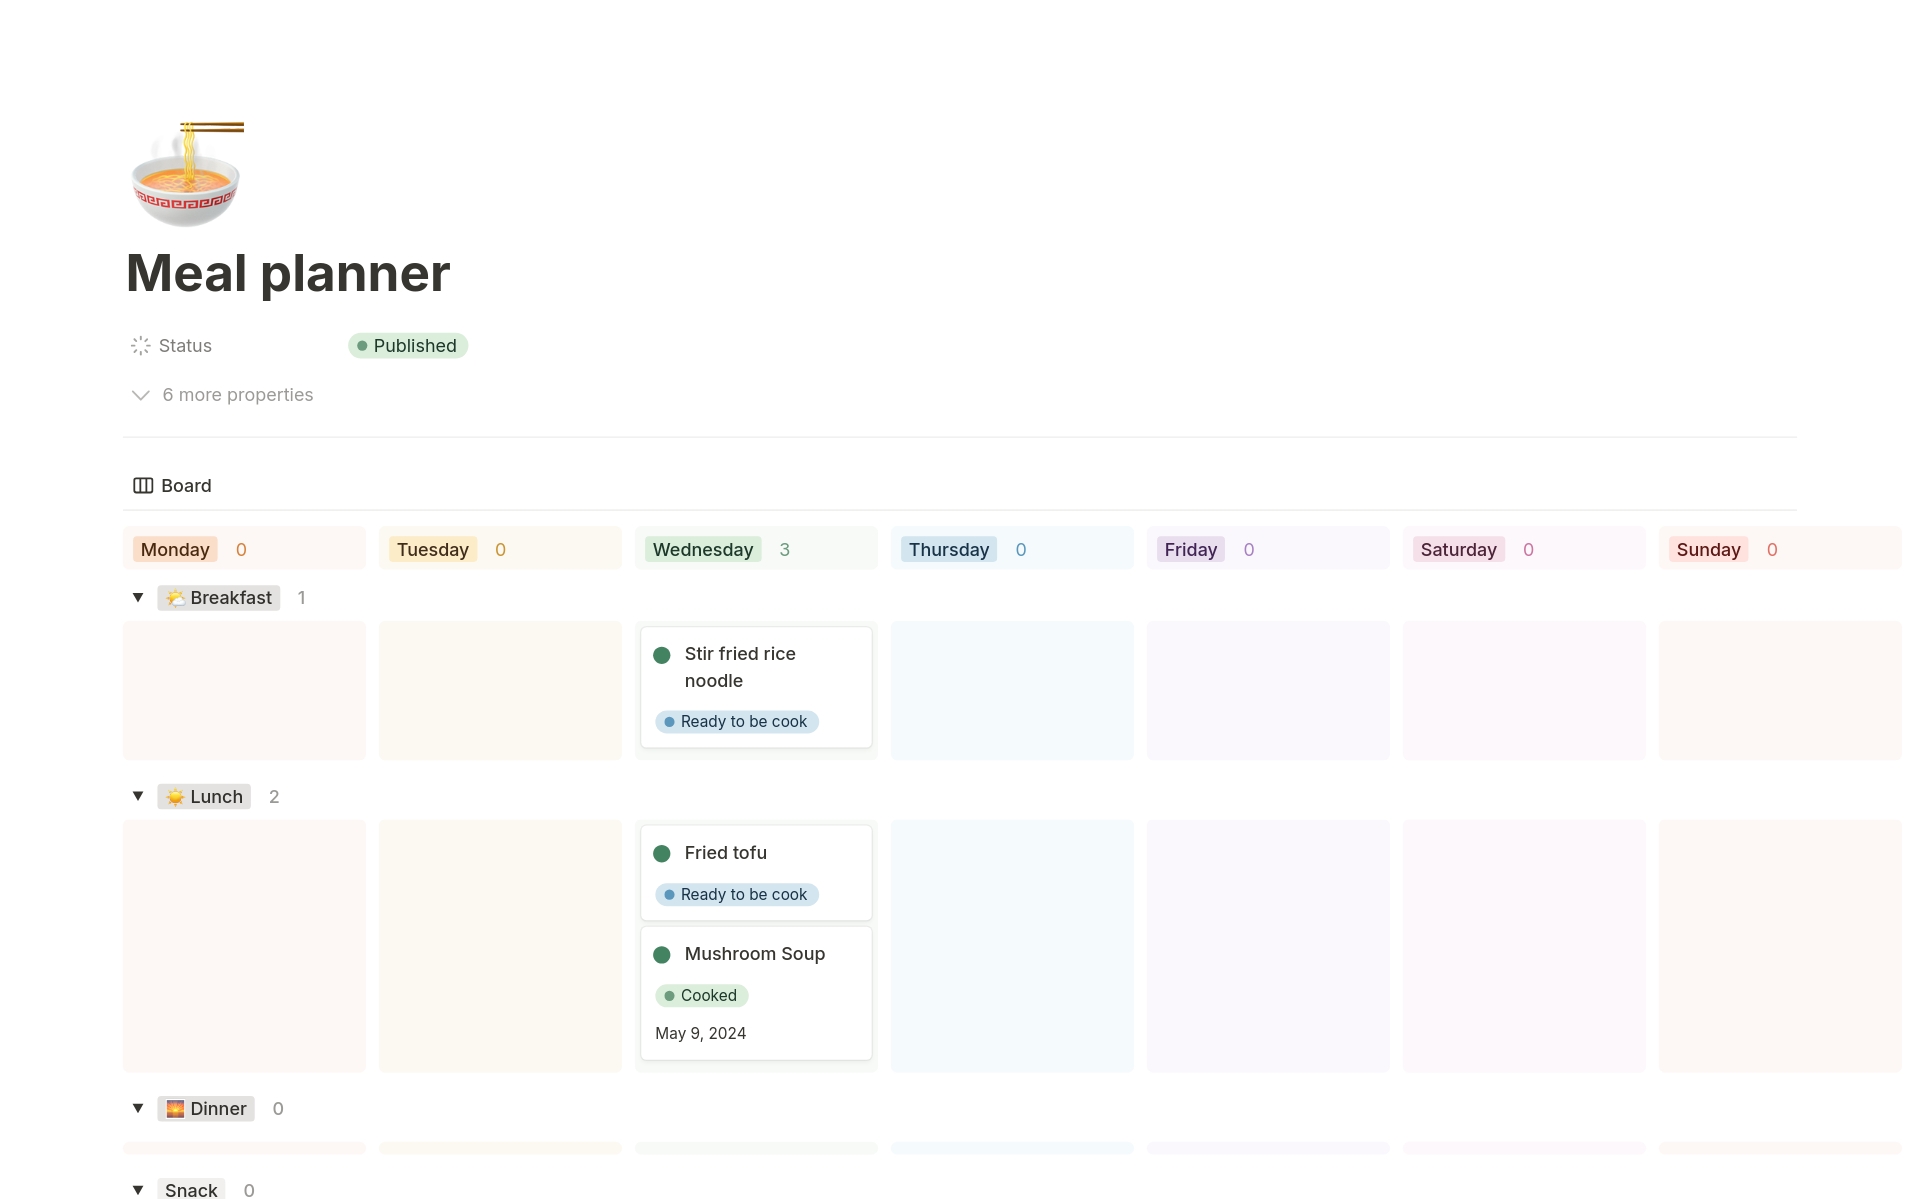 A meal planner with space for planning three meals a day for a week. There is also a space for storing recipes and recording what you have in your pantry and fridge. All the things you need for meal planning in one place.